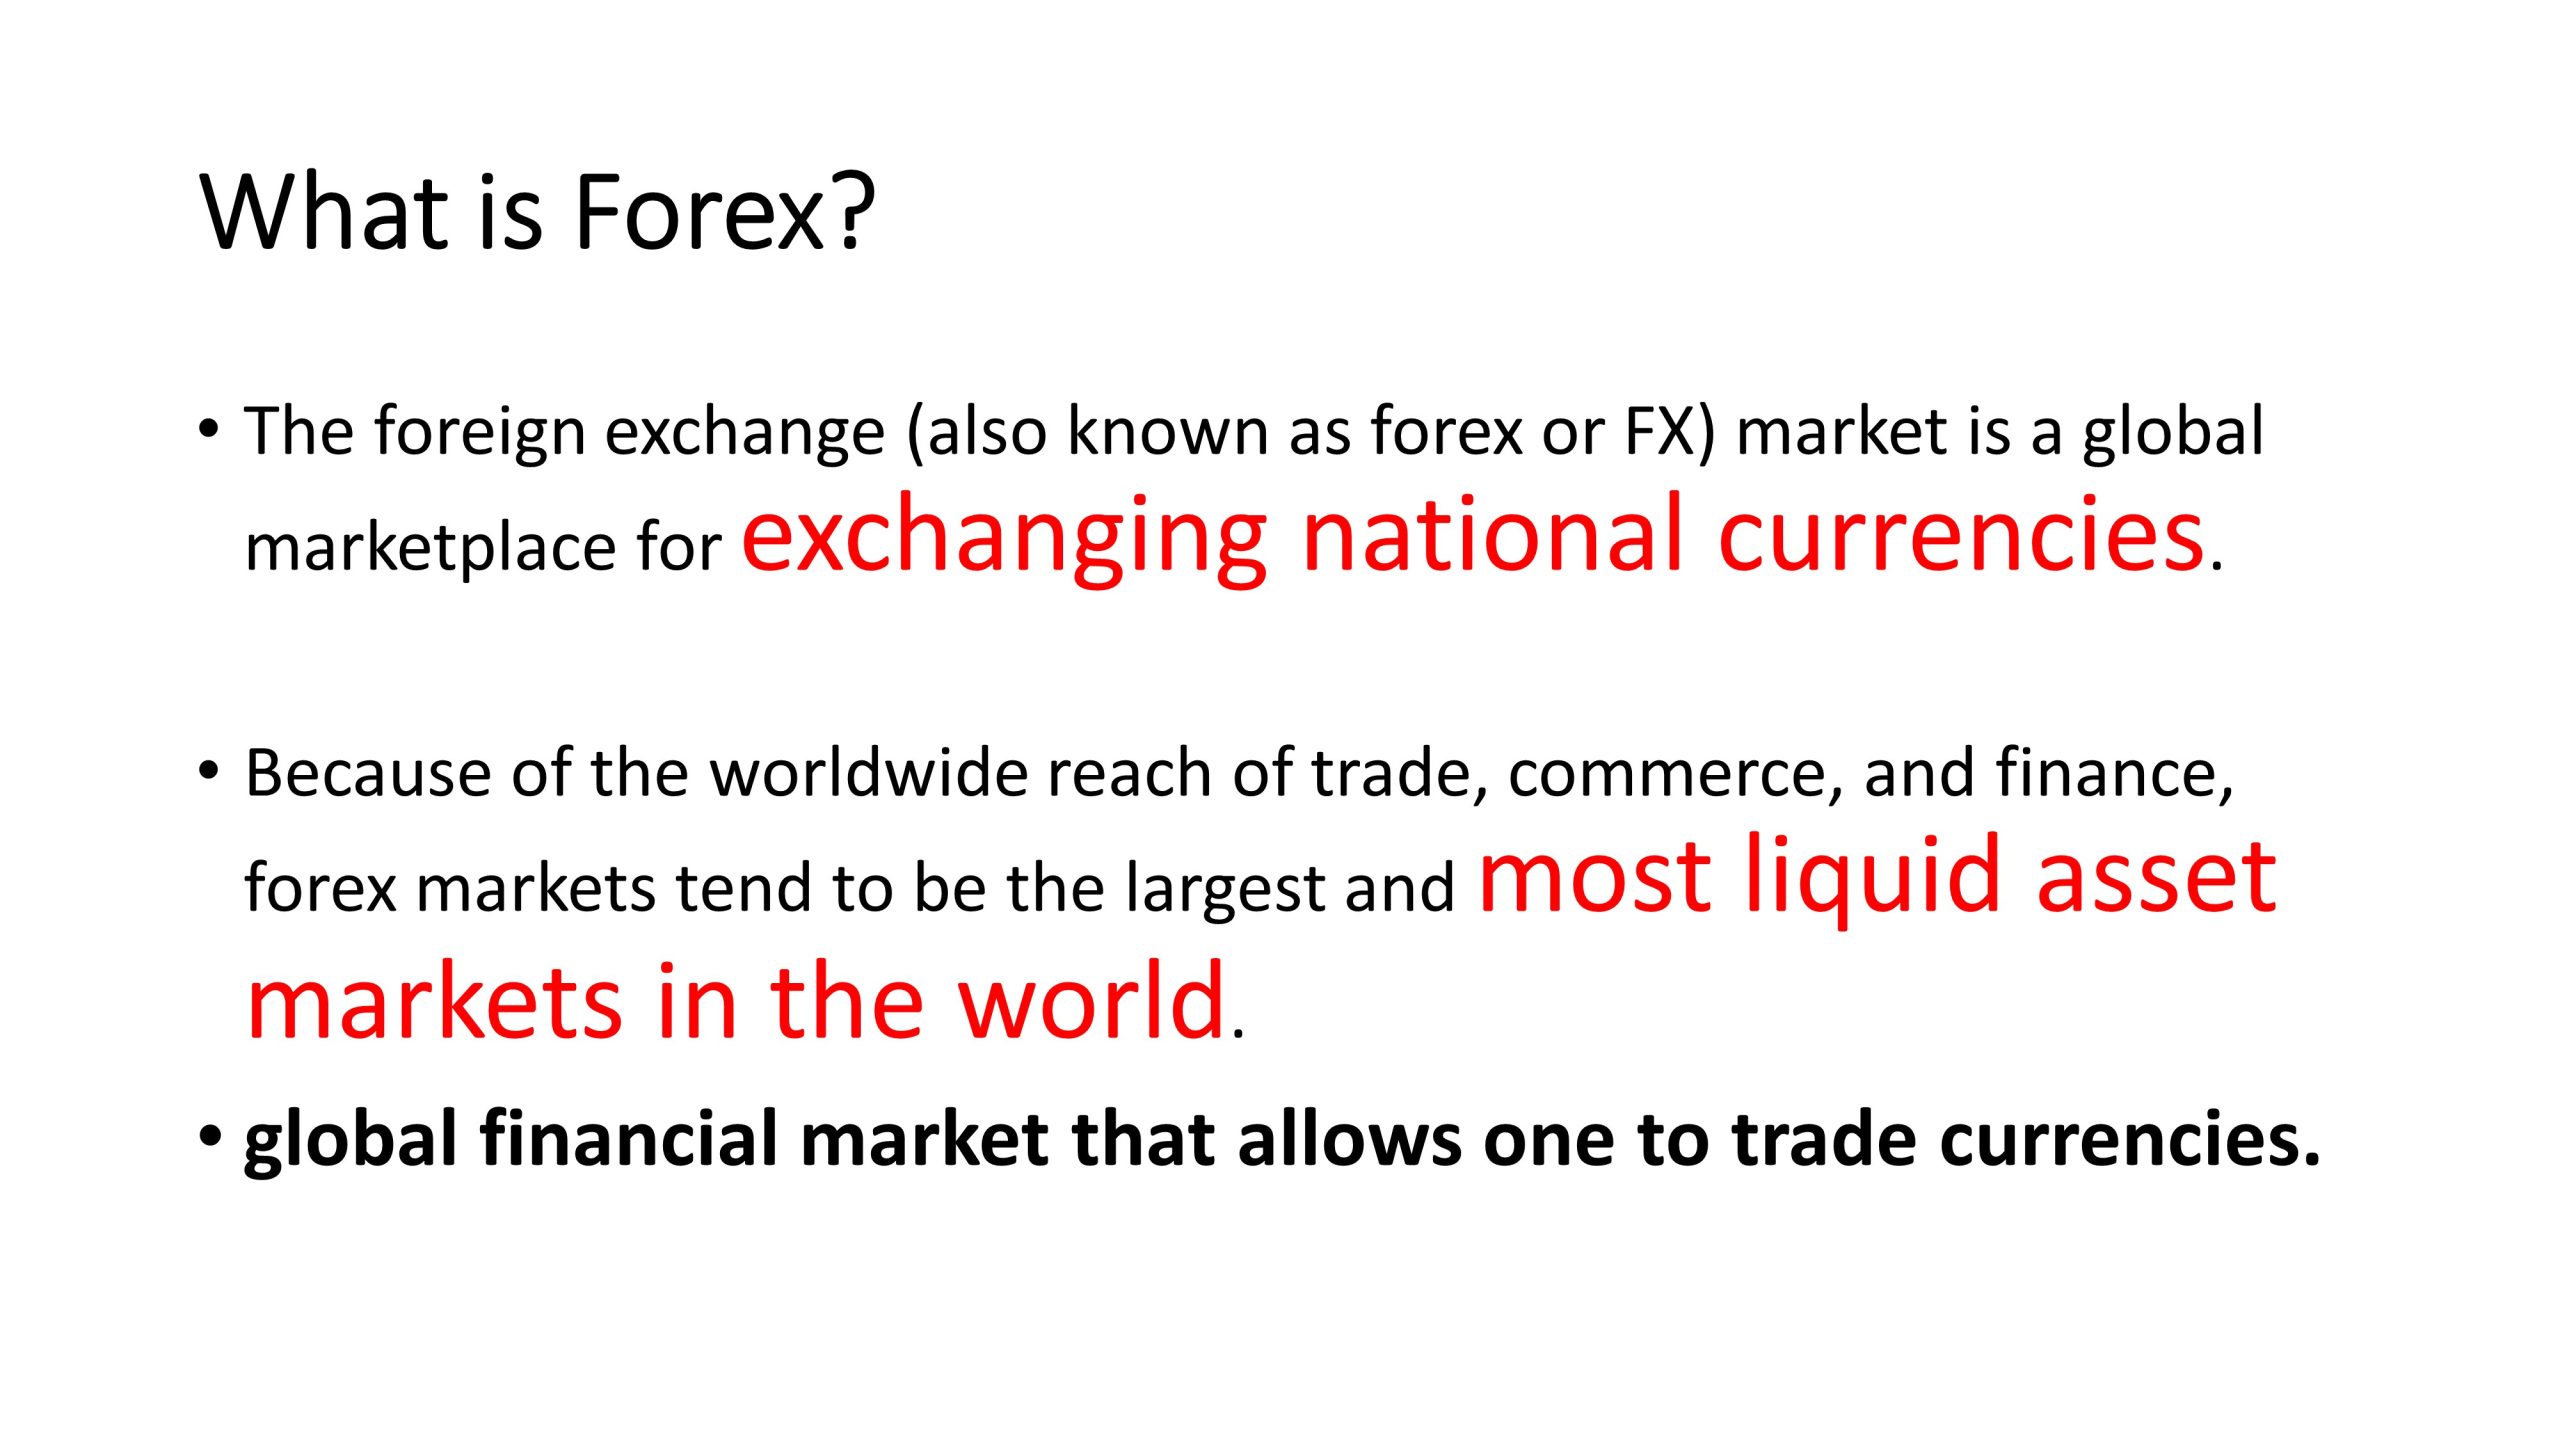 what is forex definition